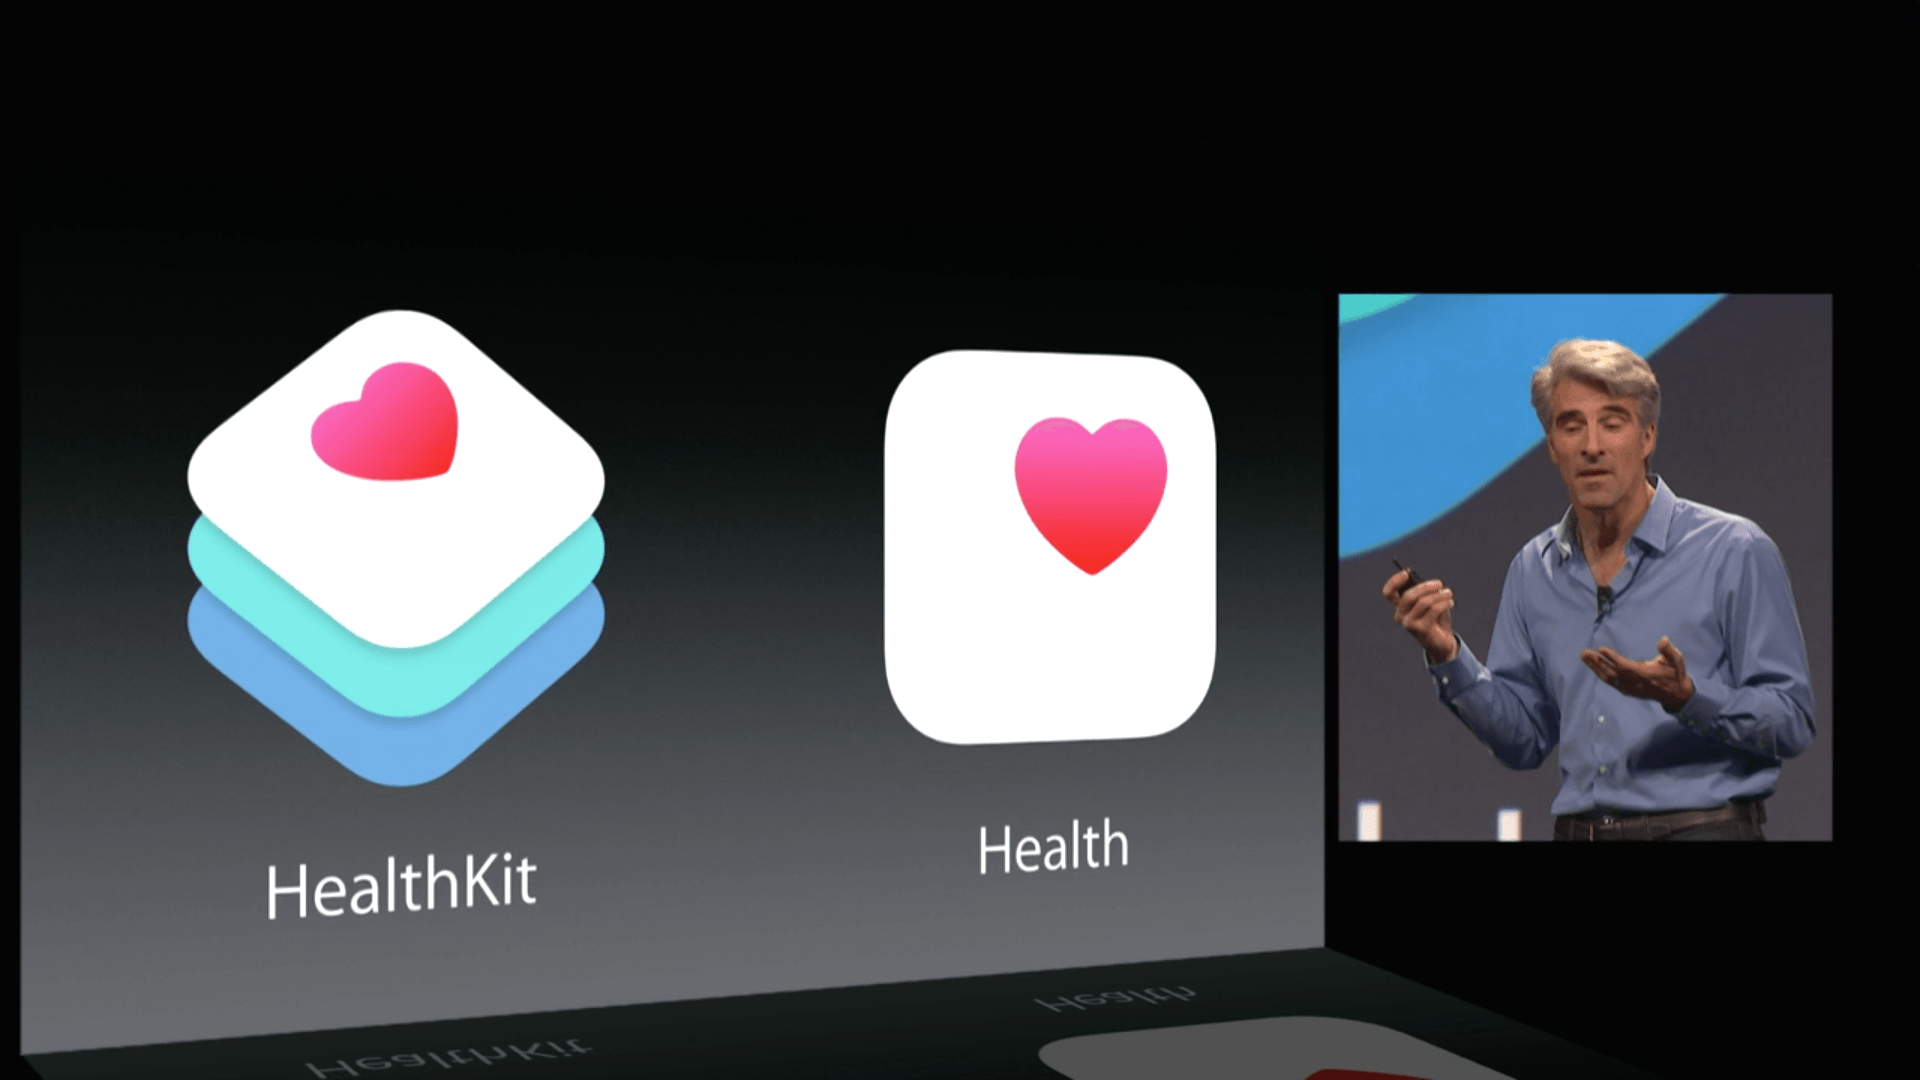 HealthKit and Health announced at WWDC 2014